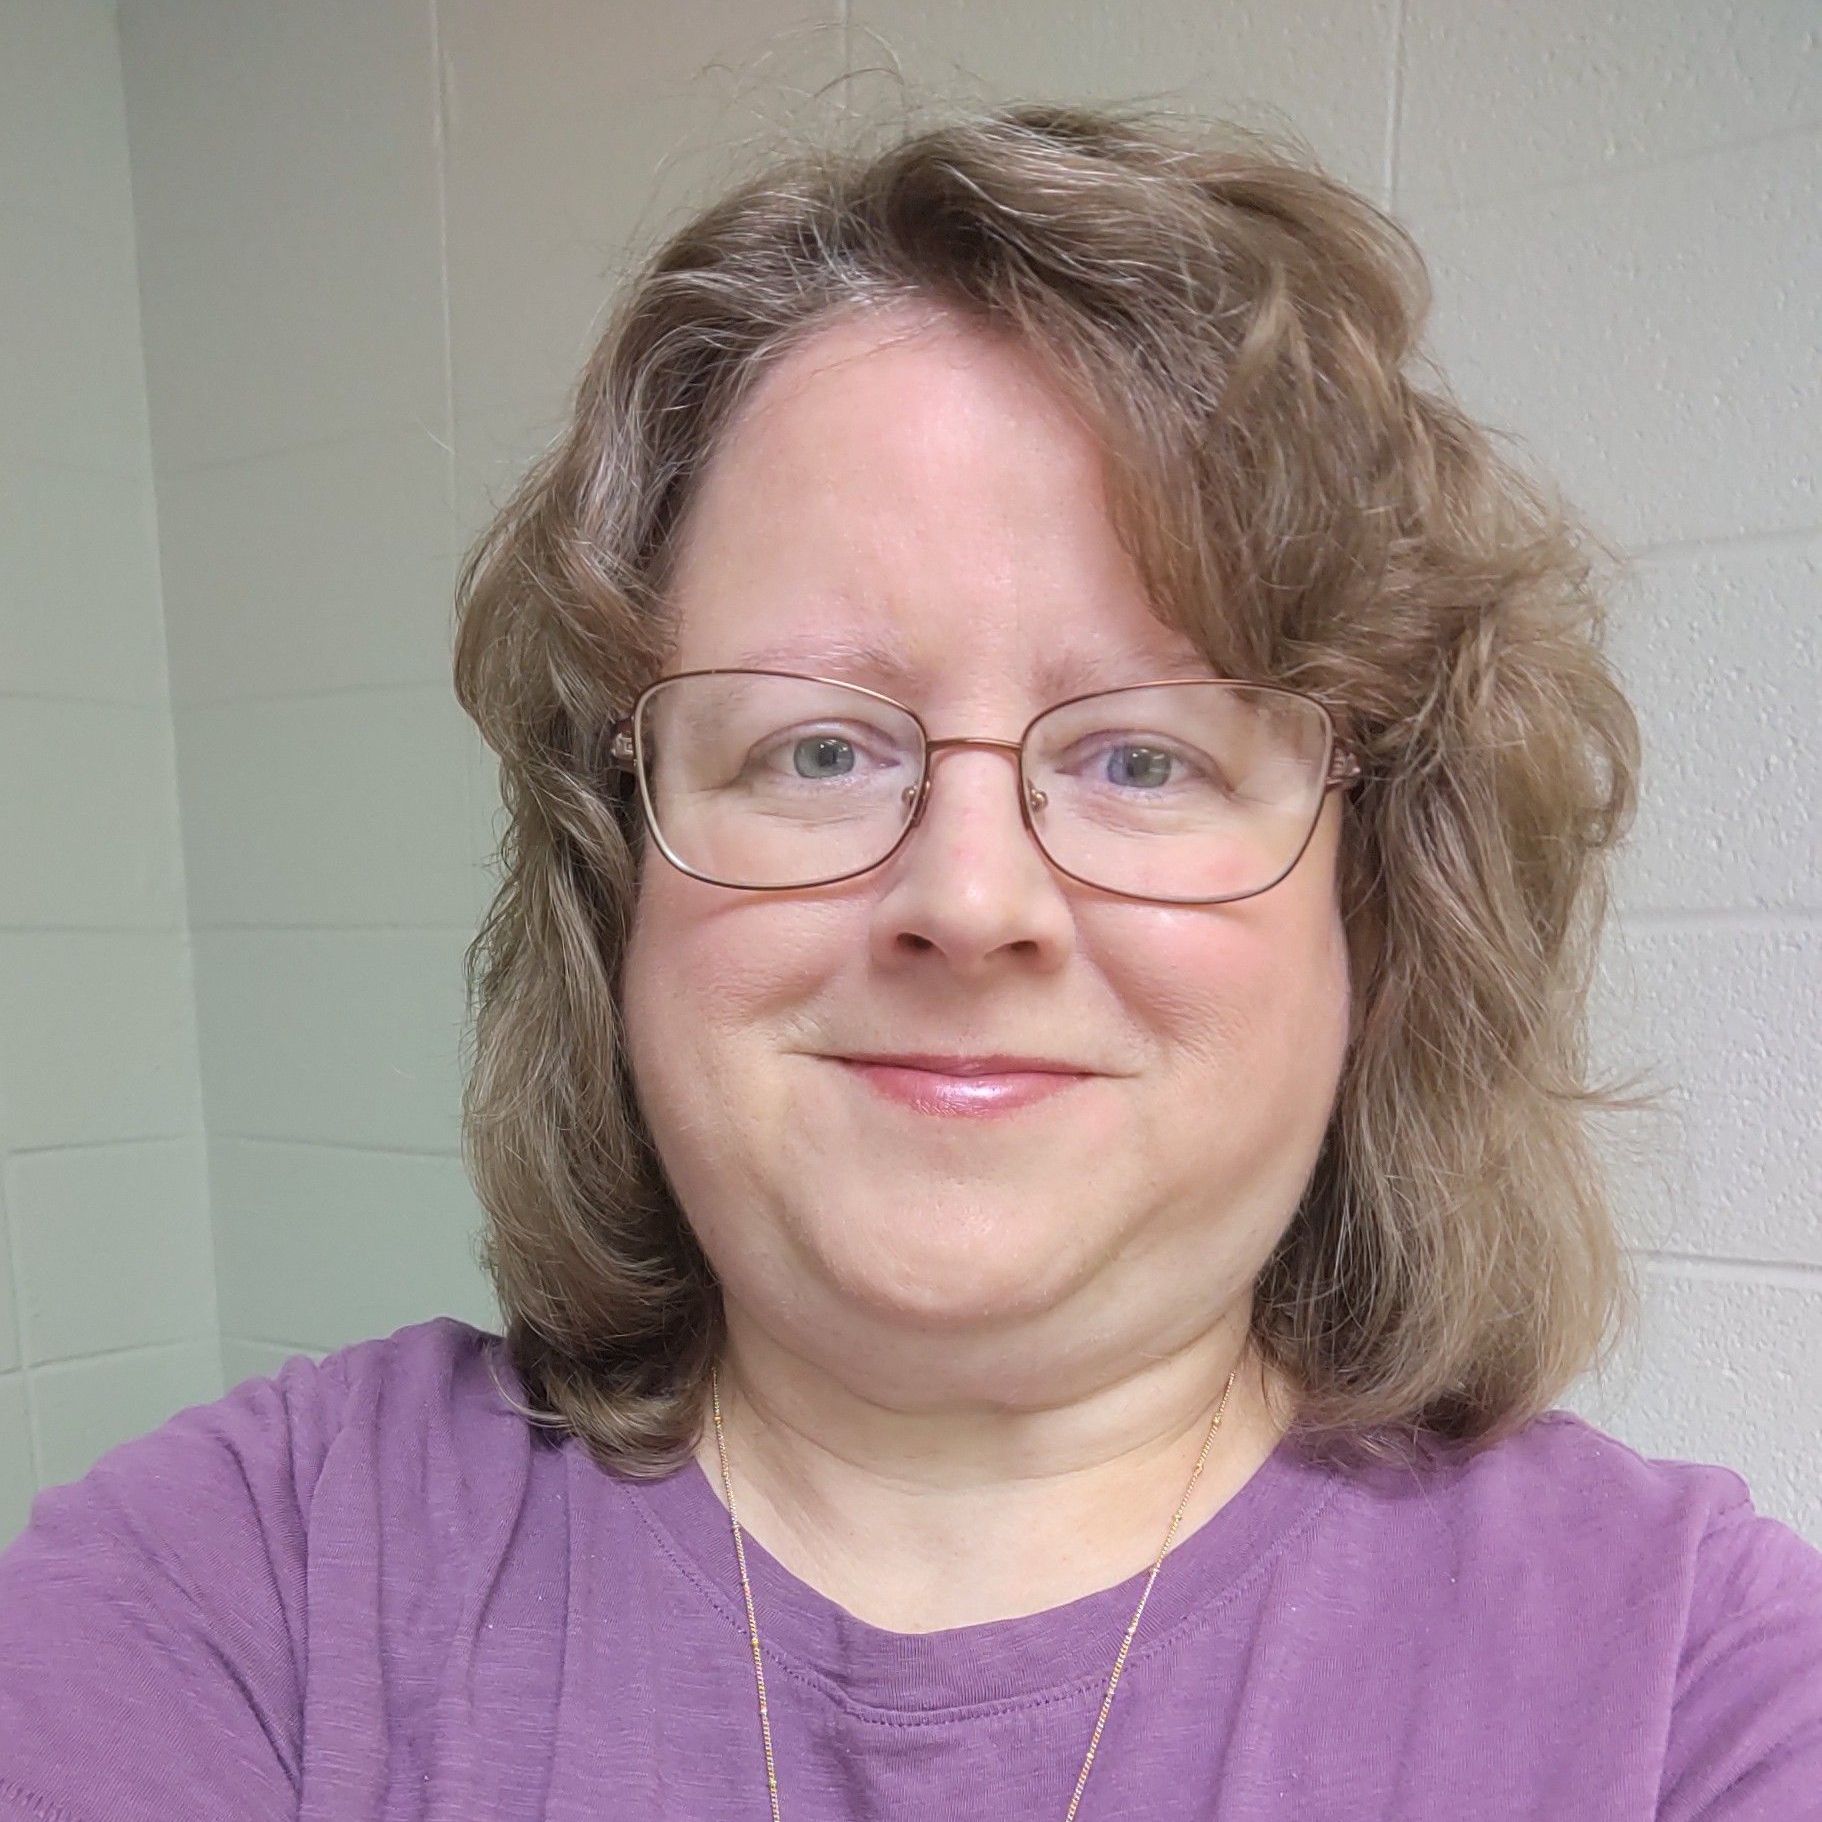 a woman wearing glasses and a purple shirt is smiling for the camera .